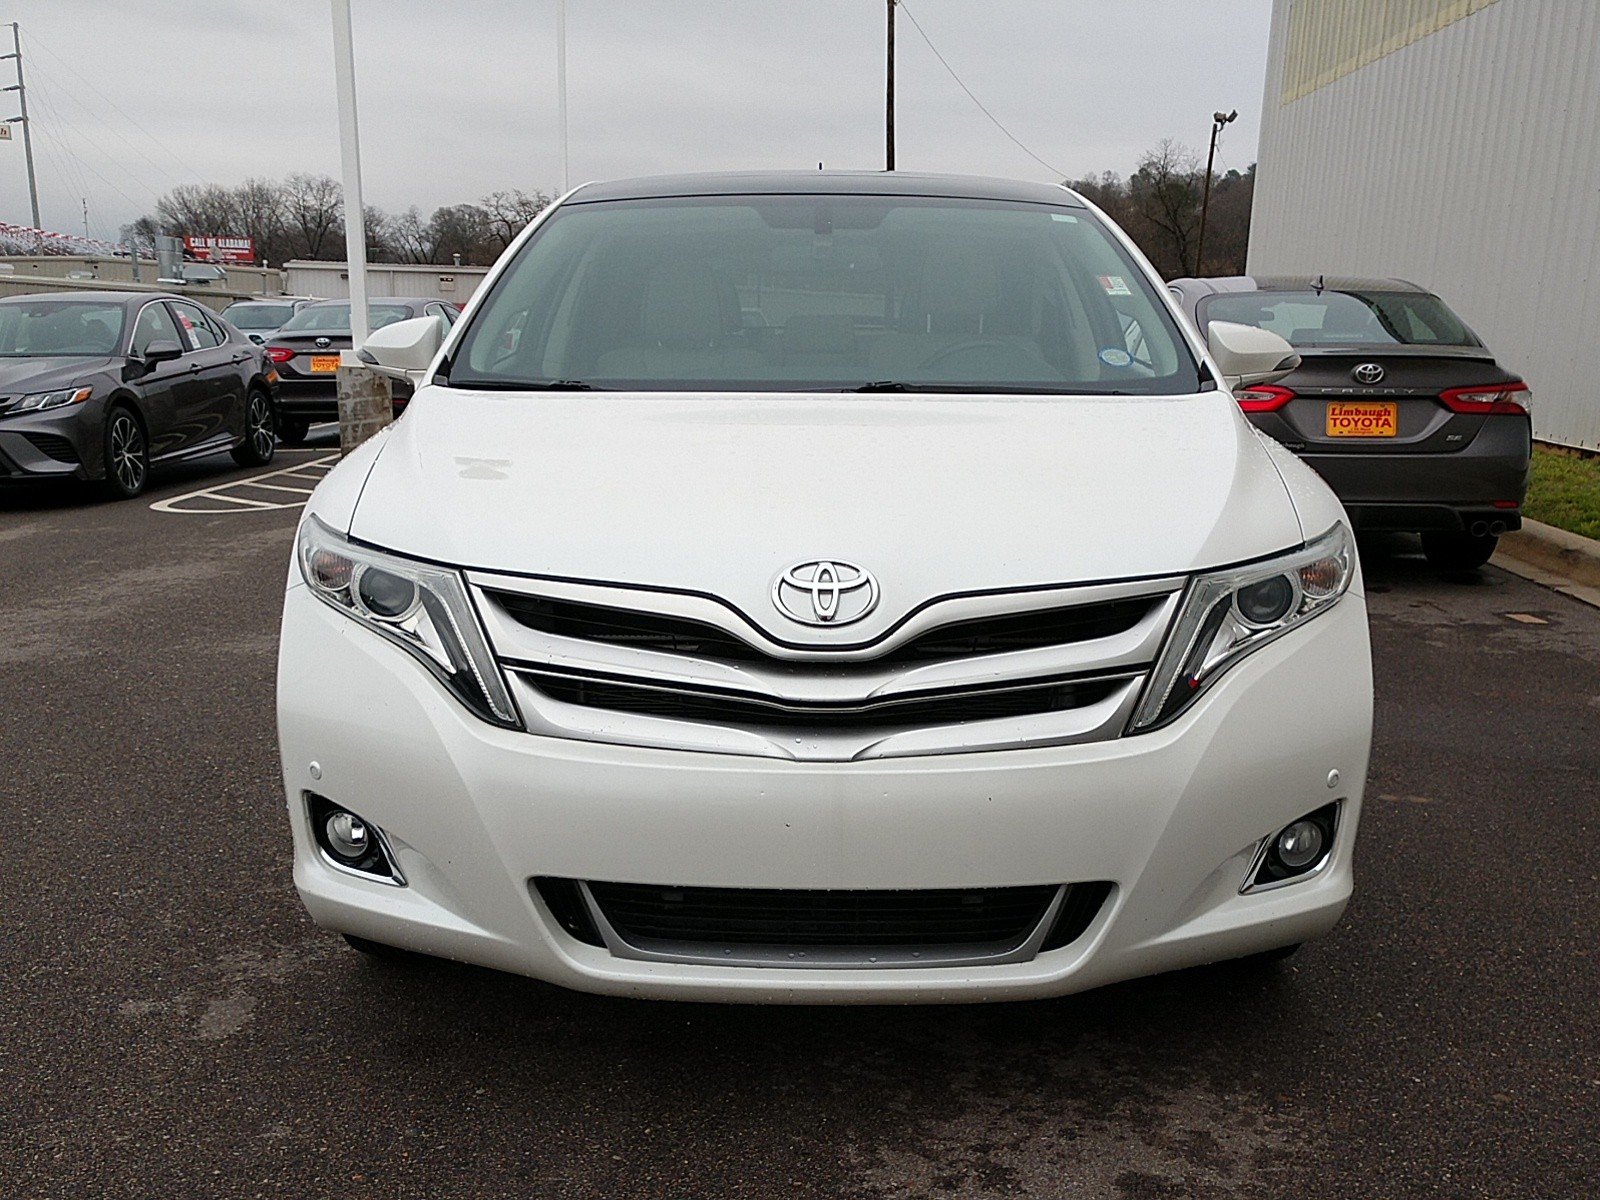 Used 2015 Toyota Venza For Sale at Kingston Toyota  VIN 4T3BK3BB2FU117568